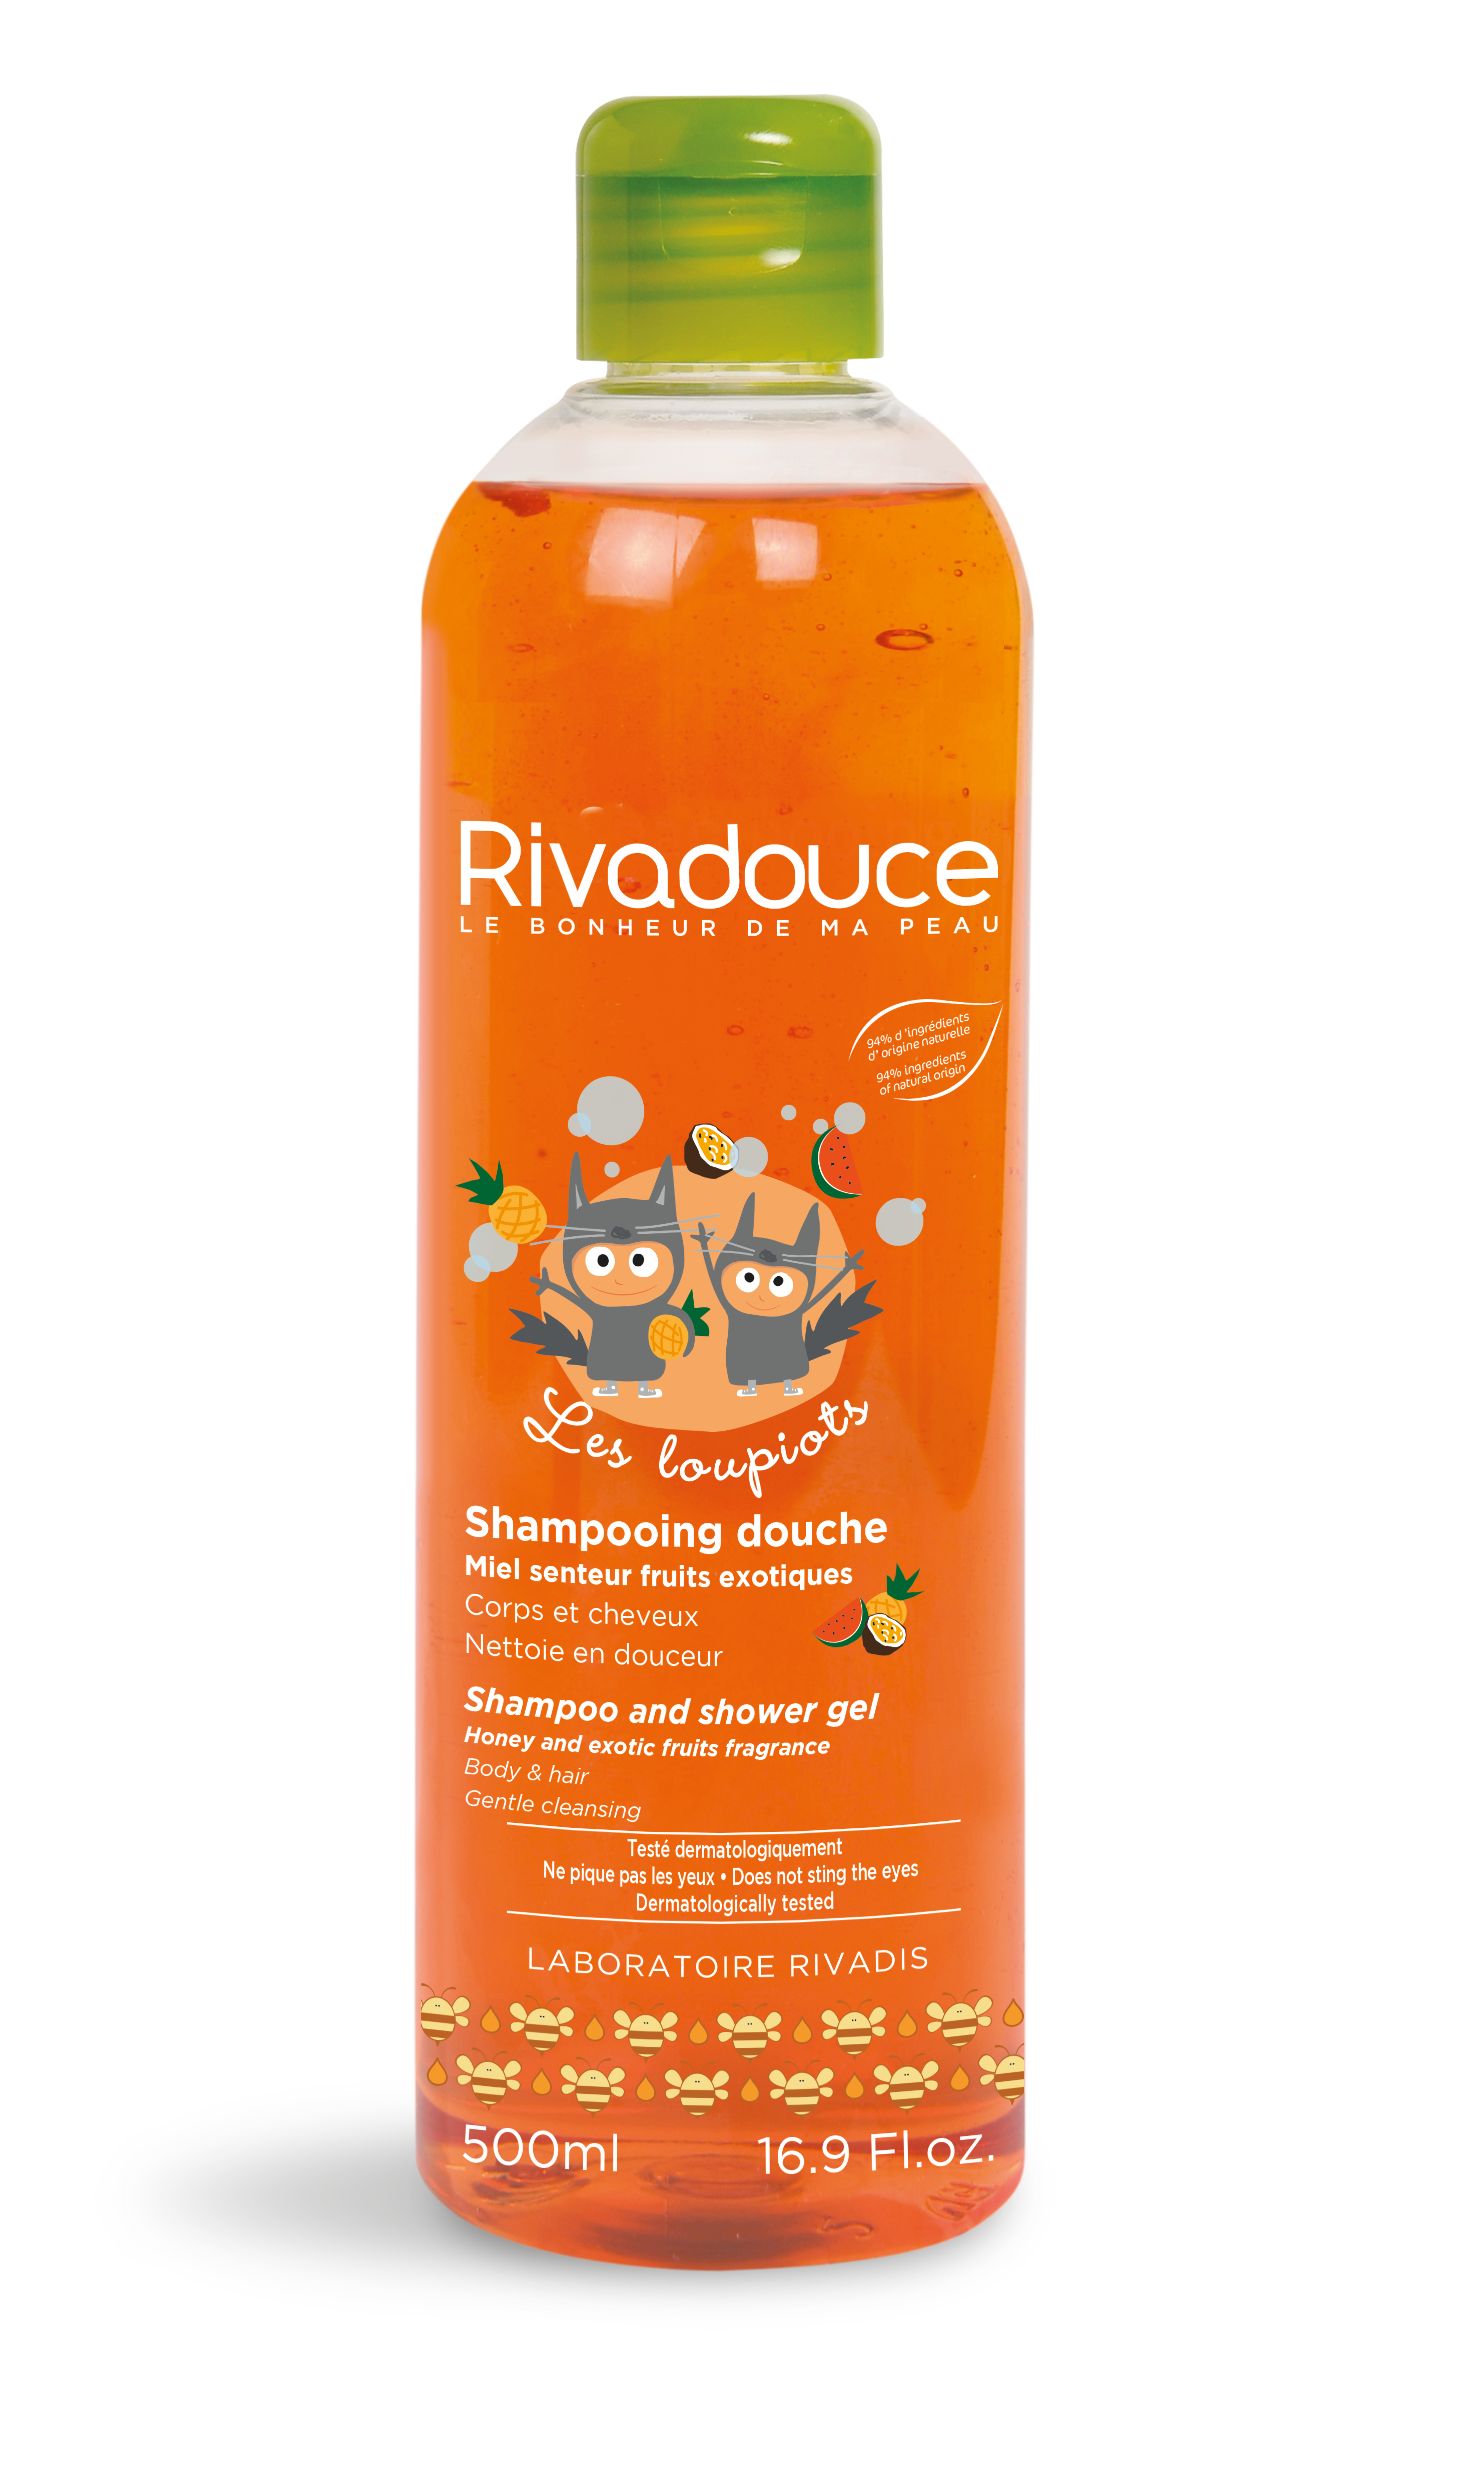 Rivadouce Loupiots Shampooing Douche Miel et Fruits Exotiques (Honey and Exotic Fruits Shampoo and Body Wash) 500ml